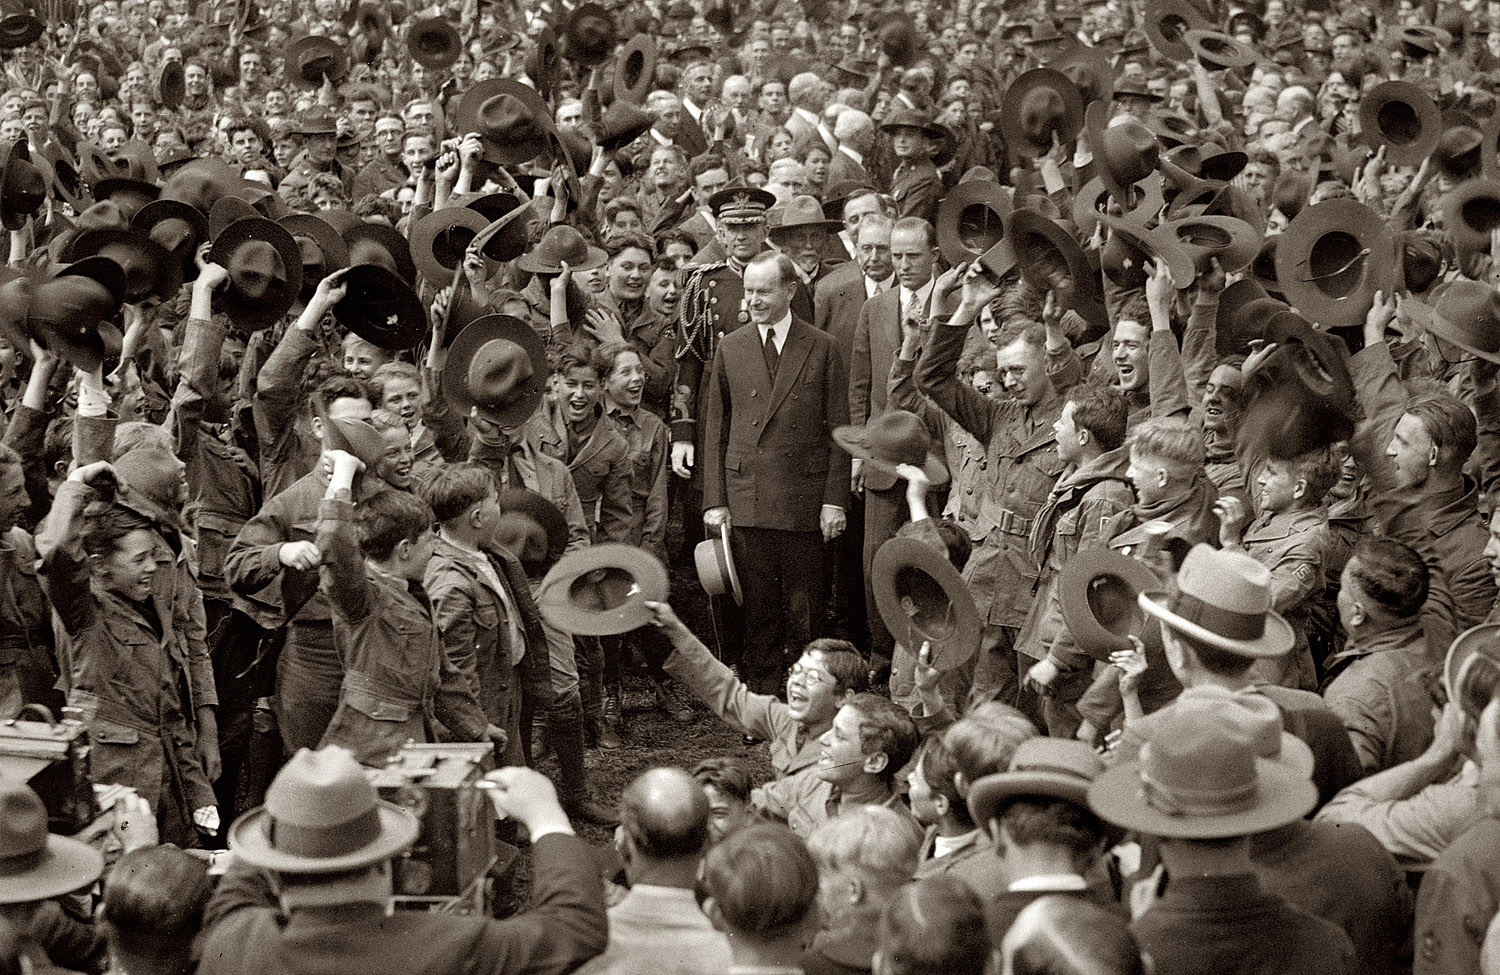 May 1, 1926. President Coolidge and Boy Scouts on the South Lawn of the White House. View full size. 4x5 glass negative, National Photo Company Collection.